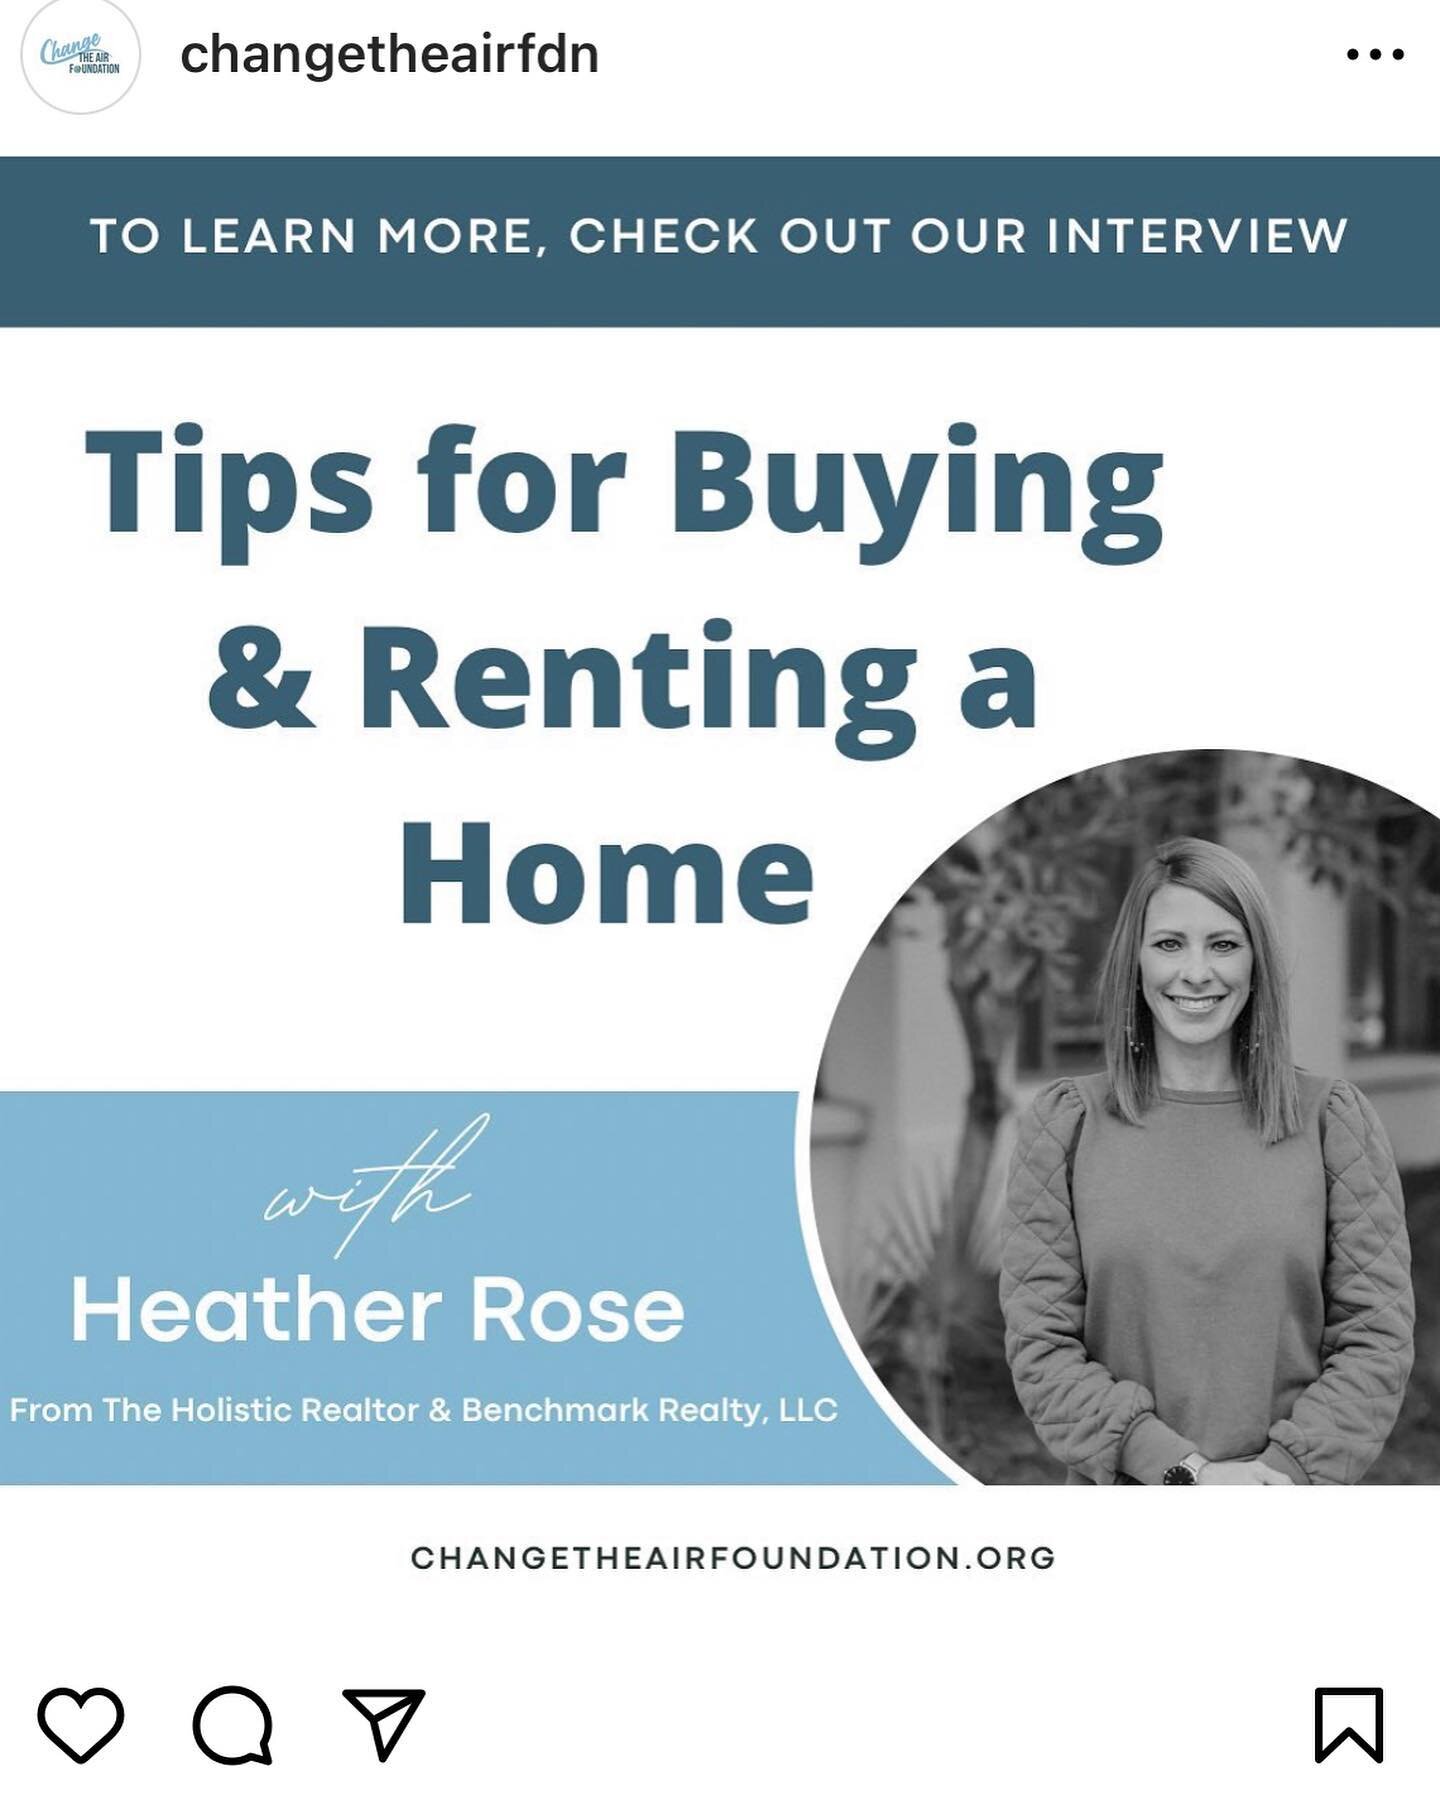 Catch my latest interview with @changetheairfdn! Learn how to protect yourself when purchasing  a home! 🏡 

https://changetheairfoundation.org/a-realtors.../

#healthyhomeresources #middletncommunity #middletnrealtors #middletnrealestate #moldconsci